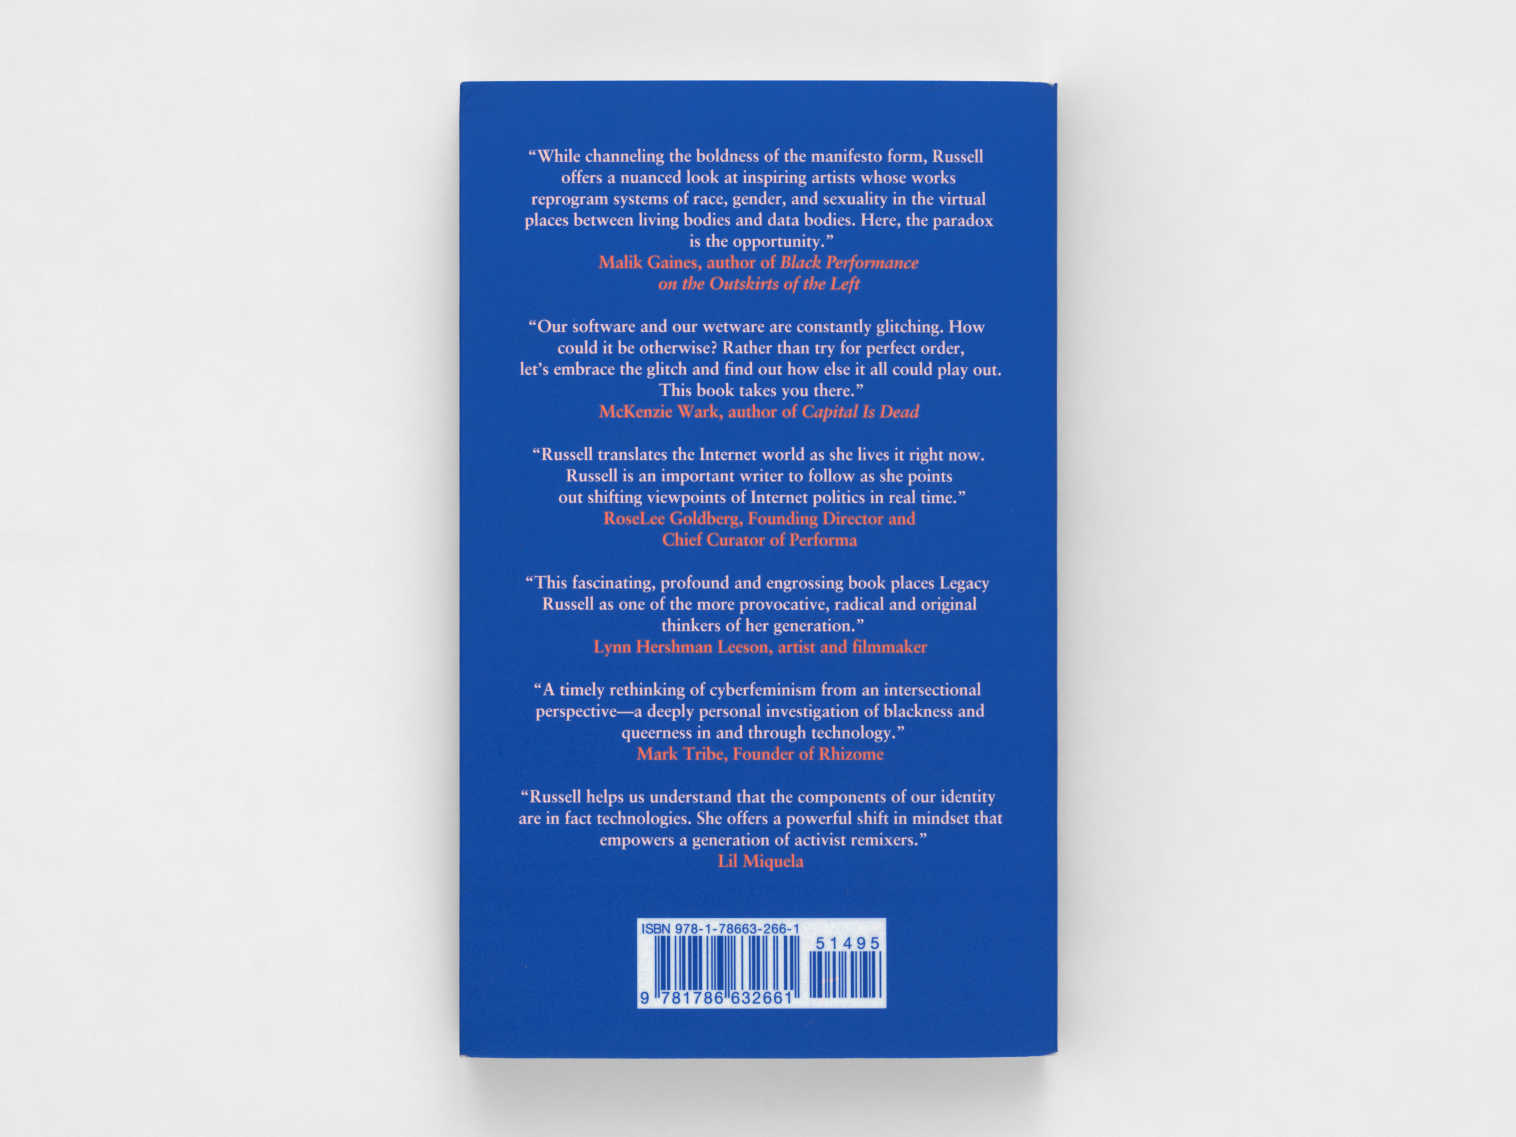 Tall dark blue book with white and peach text along the back cover.